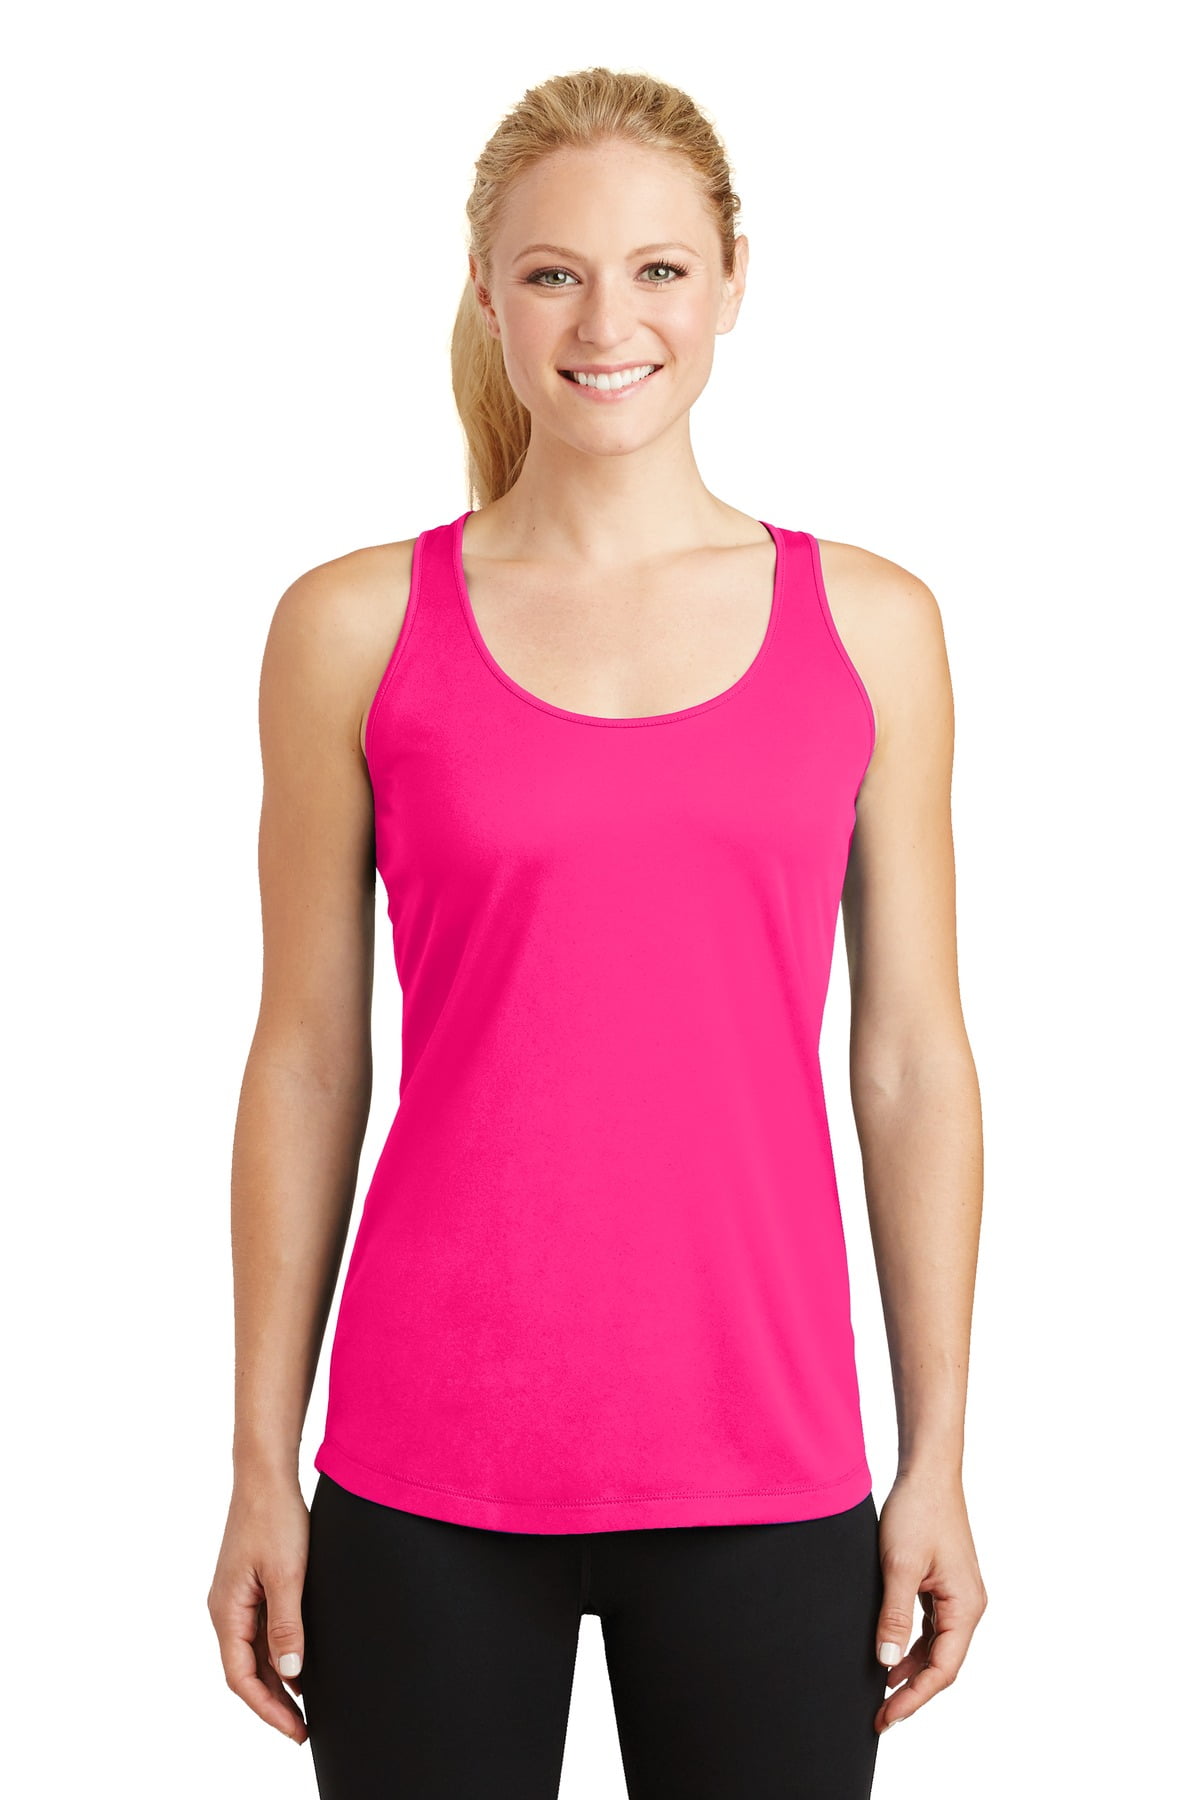 Exercise Tops